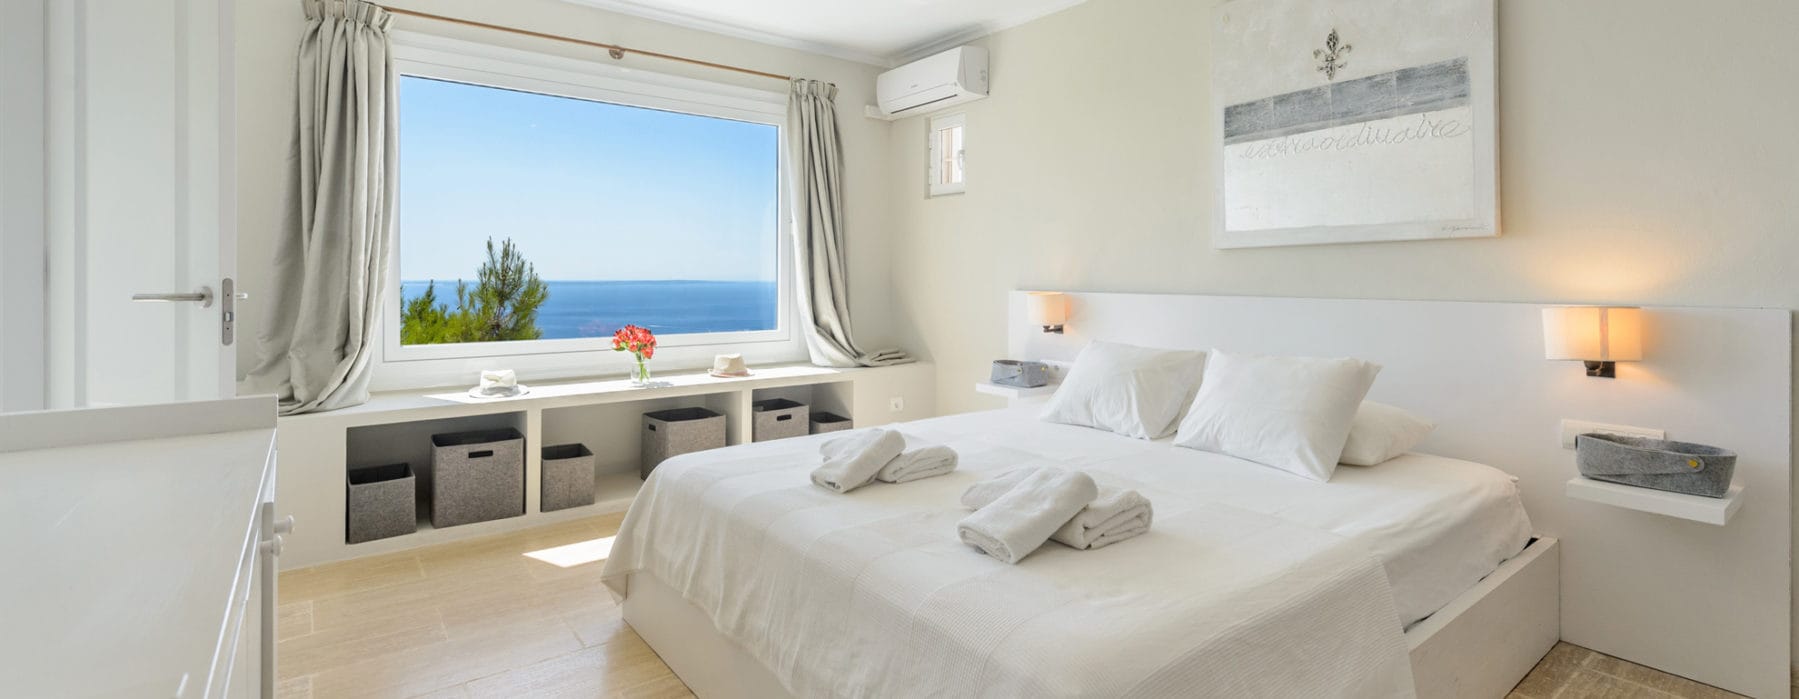 Double bedroom in white-beige design with a window that offers sea views